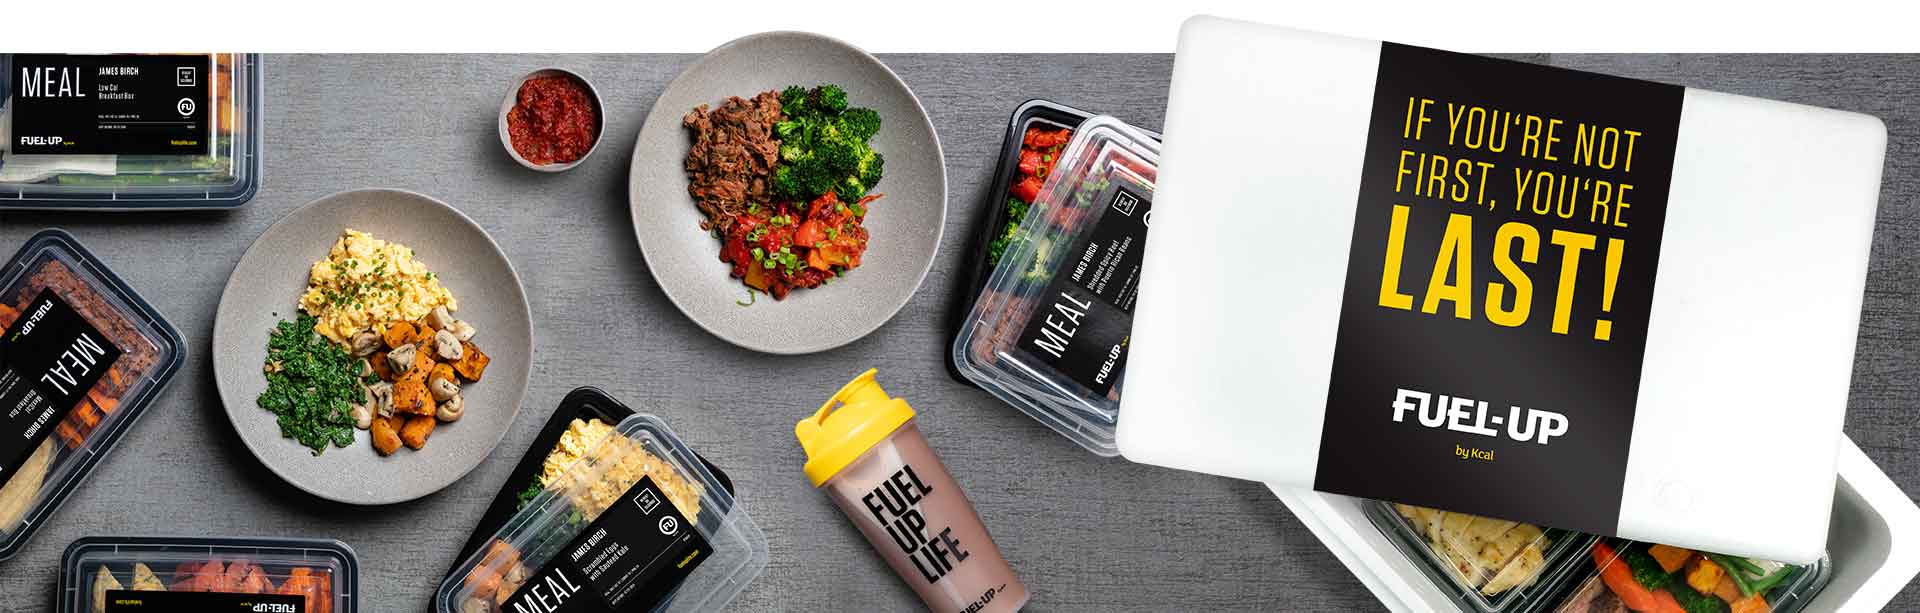 Creating A Fitness Meal Plan – What Should Be Part Of It?